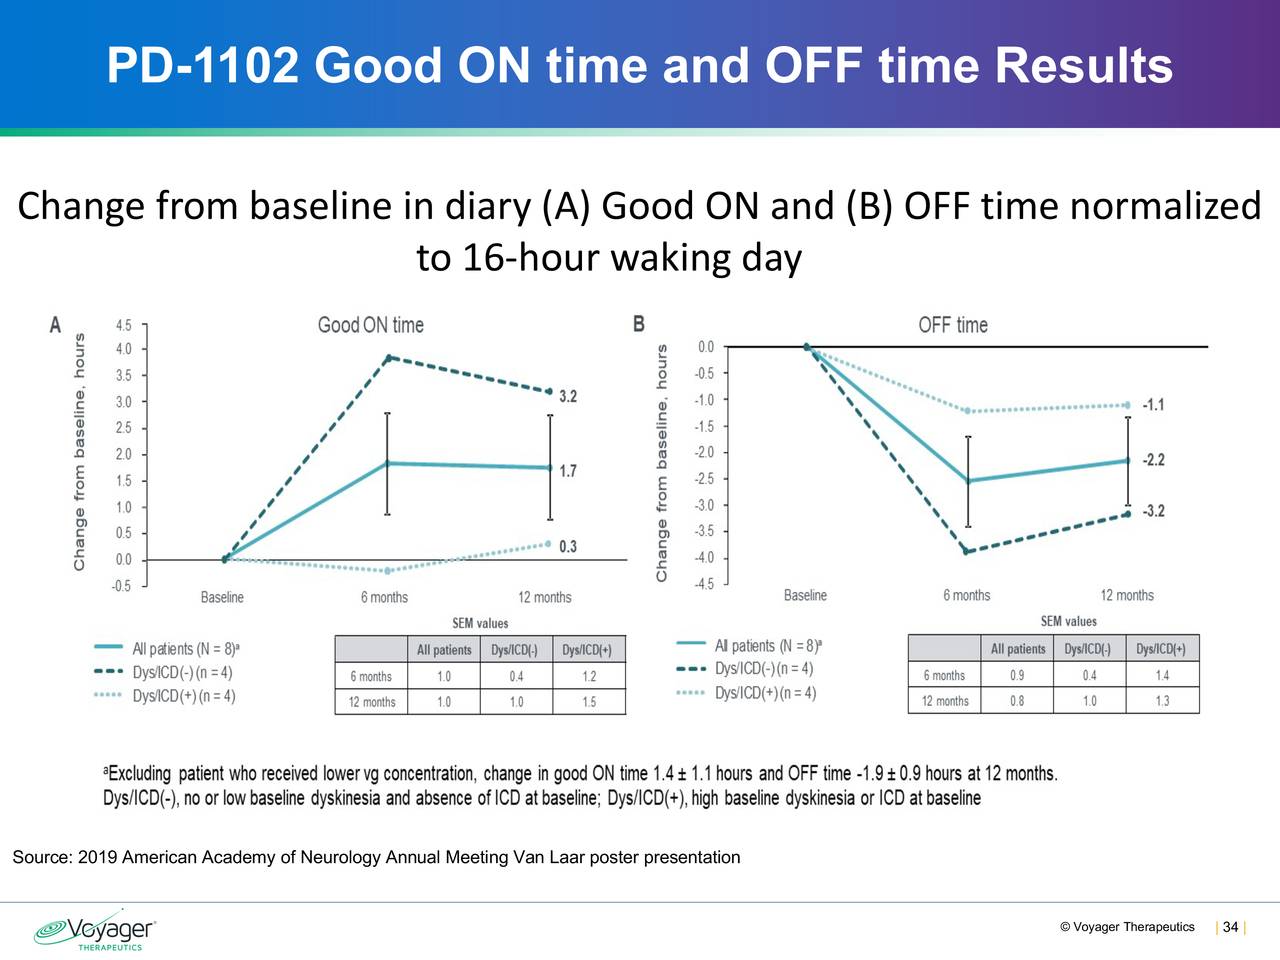 PD-1102 Good ON time and OFF time Results